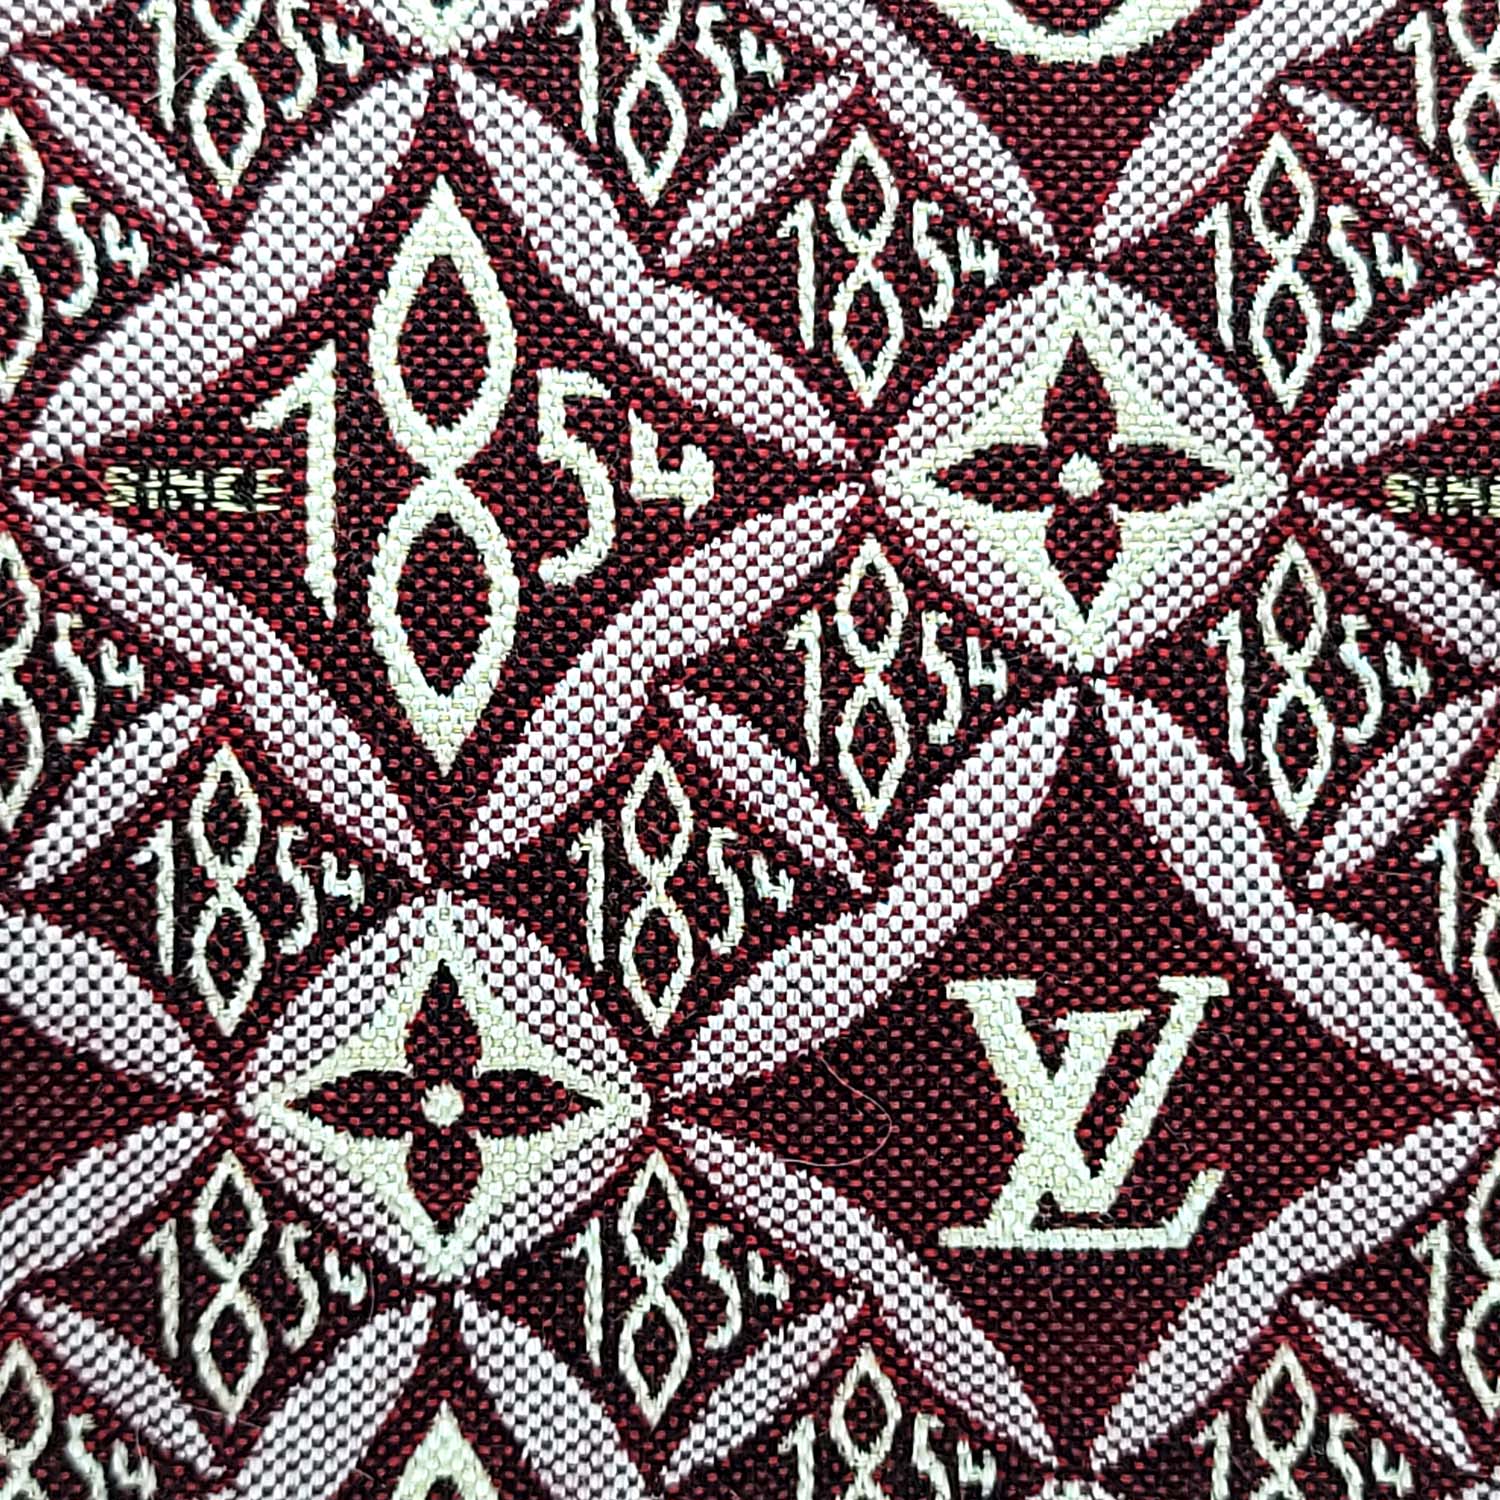 Louis Vuitton Blue Monogram Since 1854 Jacquard Textile Neverfull MM with  Pouch - OneLuxury